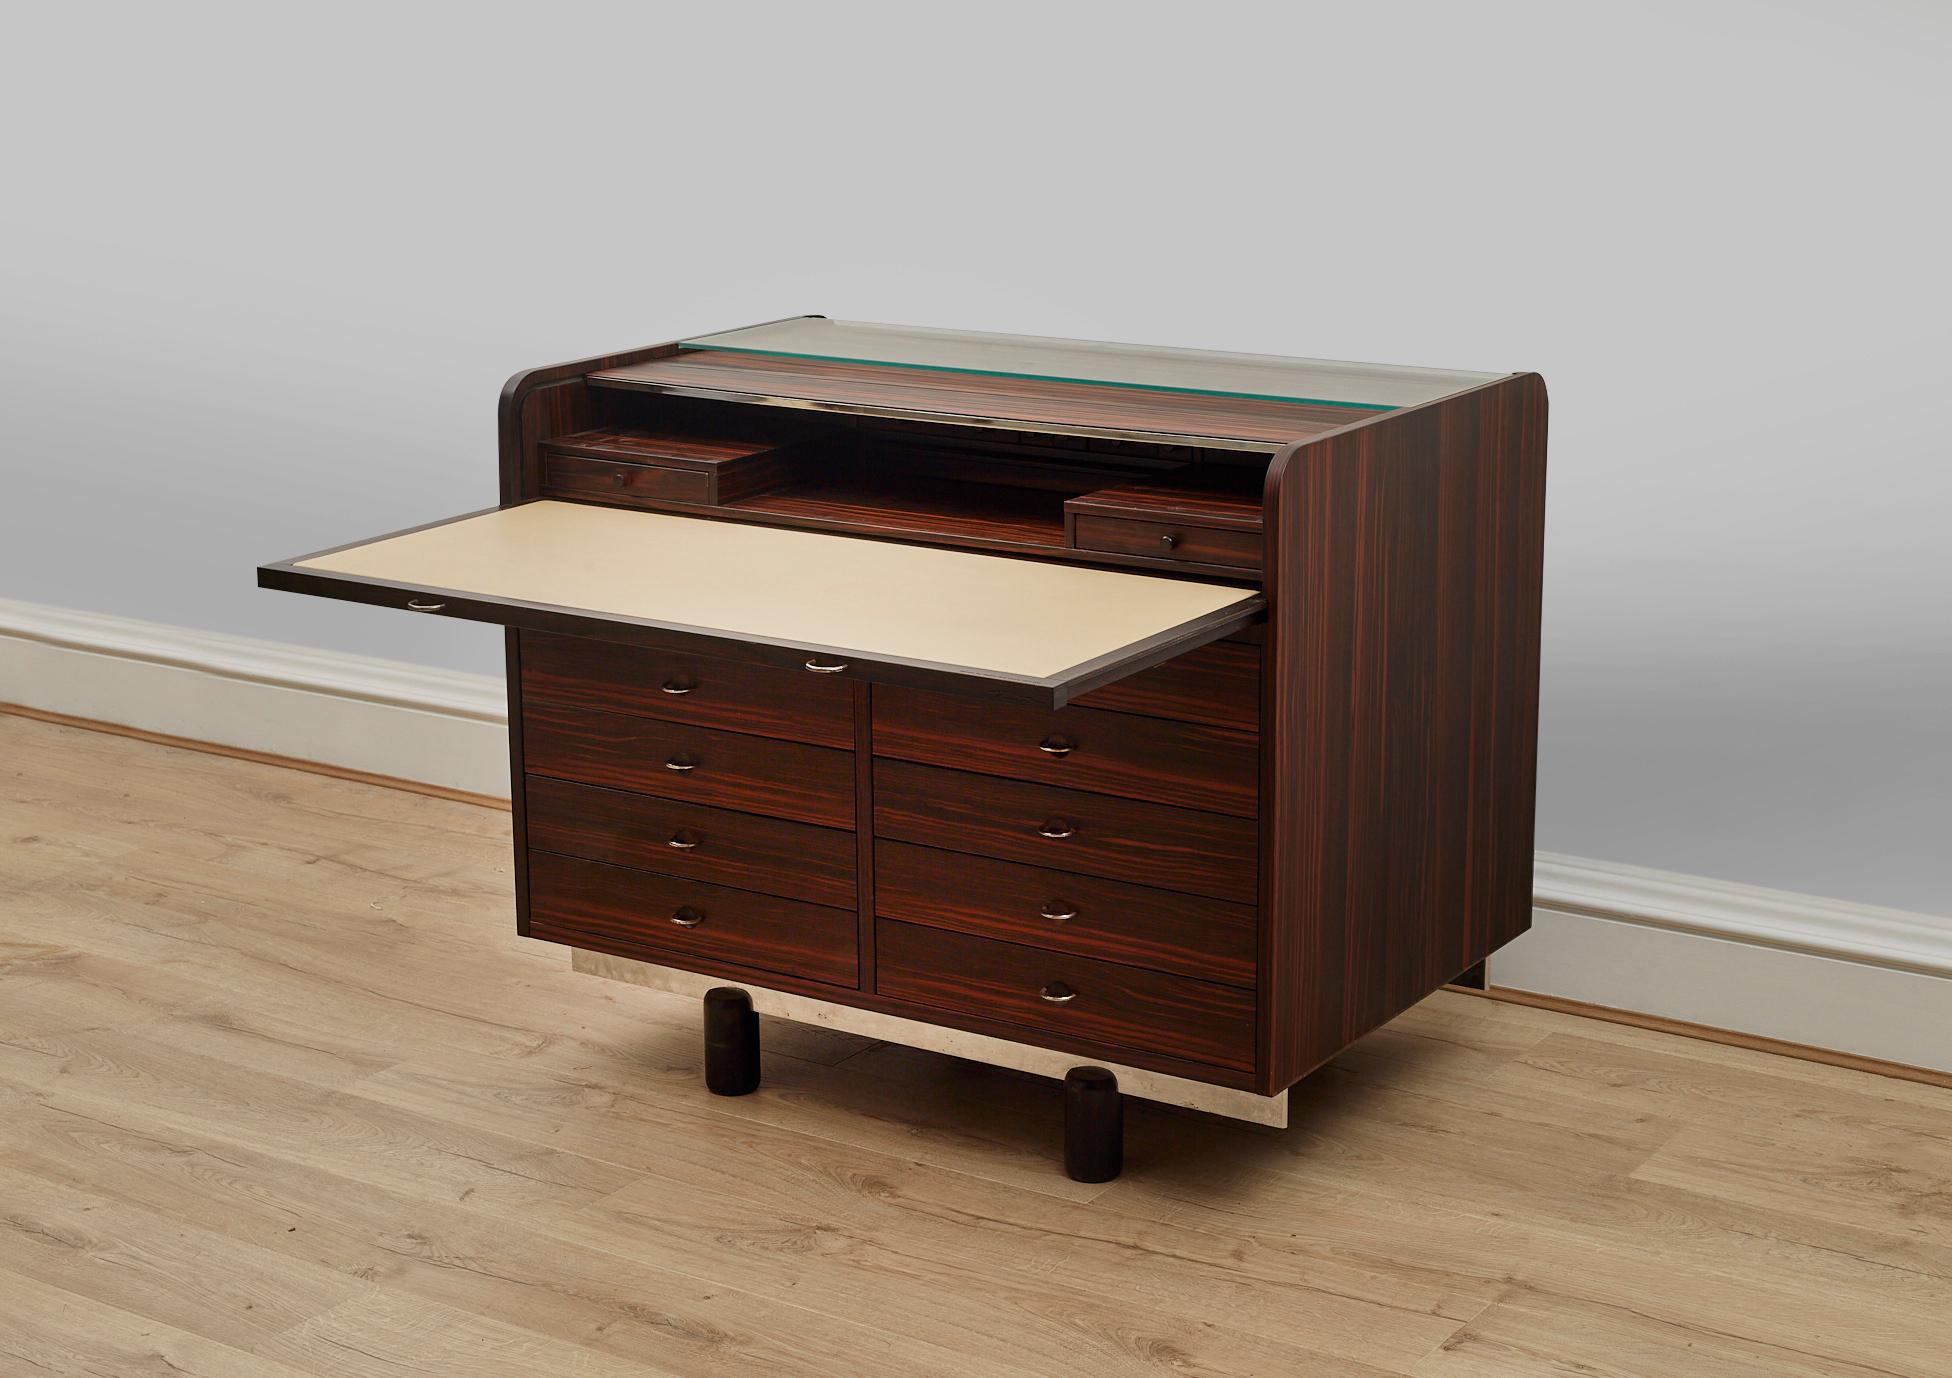 Rosewood Model 804 designed by Gianfranco Frattini and manufactured by Bernini, Italy 1960s. 

This desk is also a storage cabinet 

The desk is characterized by an ingenious mechanic pulling mechanism; if the desk plate is pulled out, the roll-top